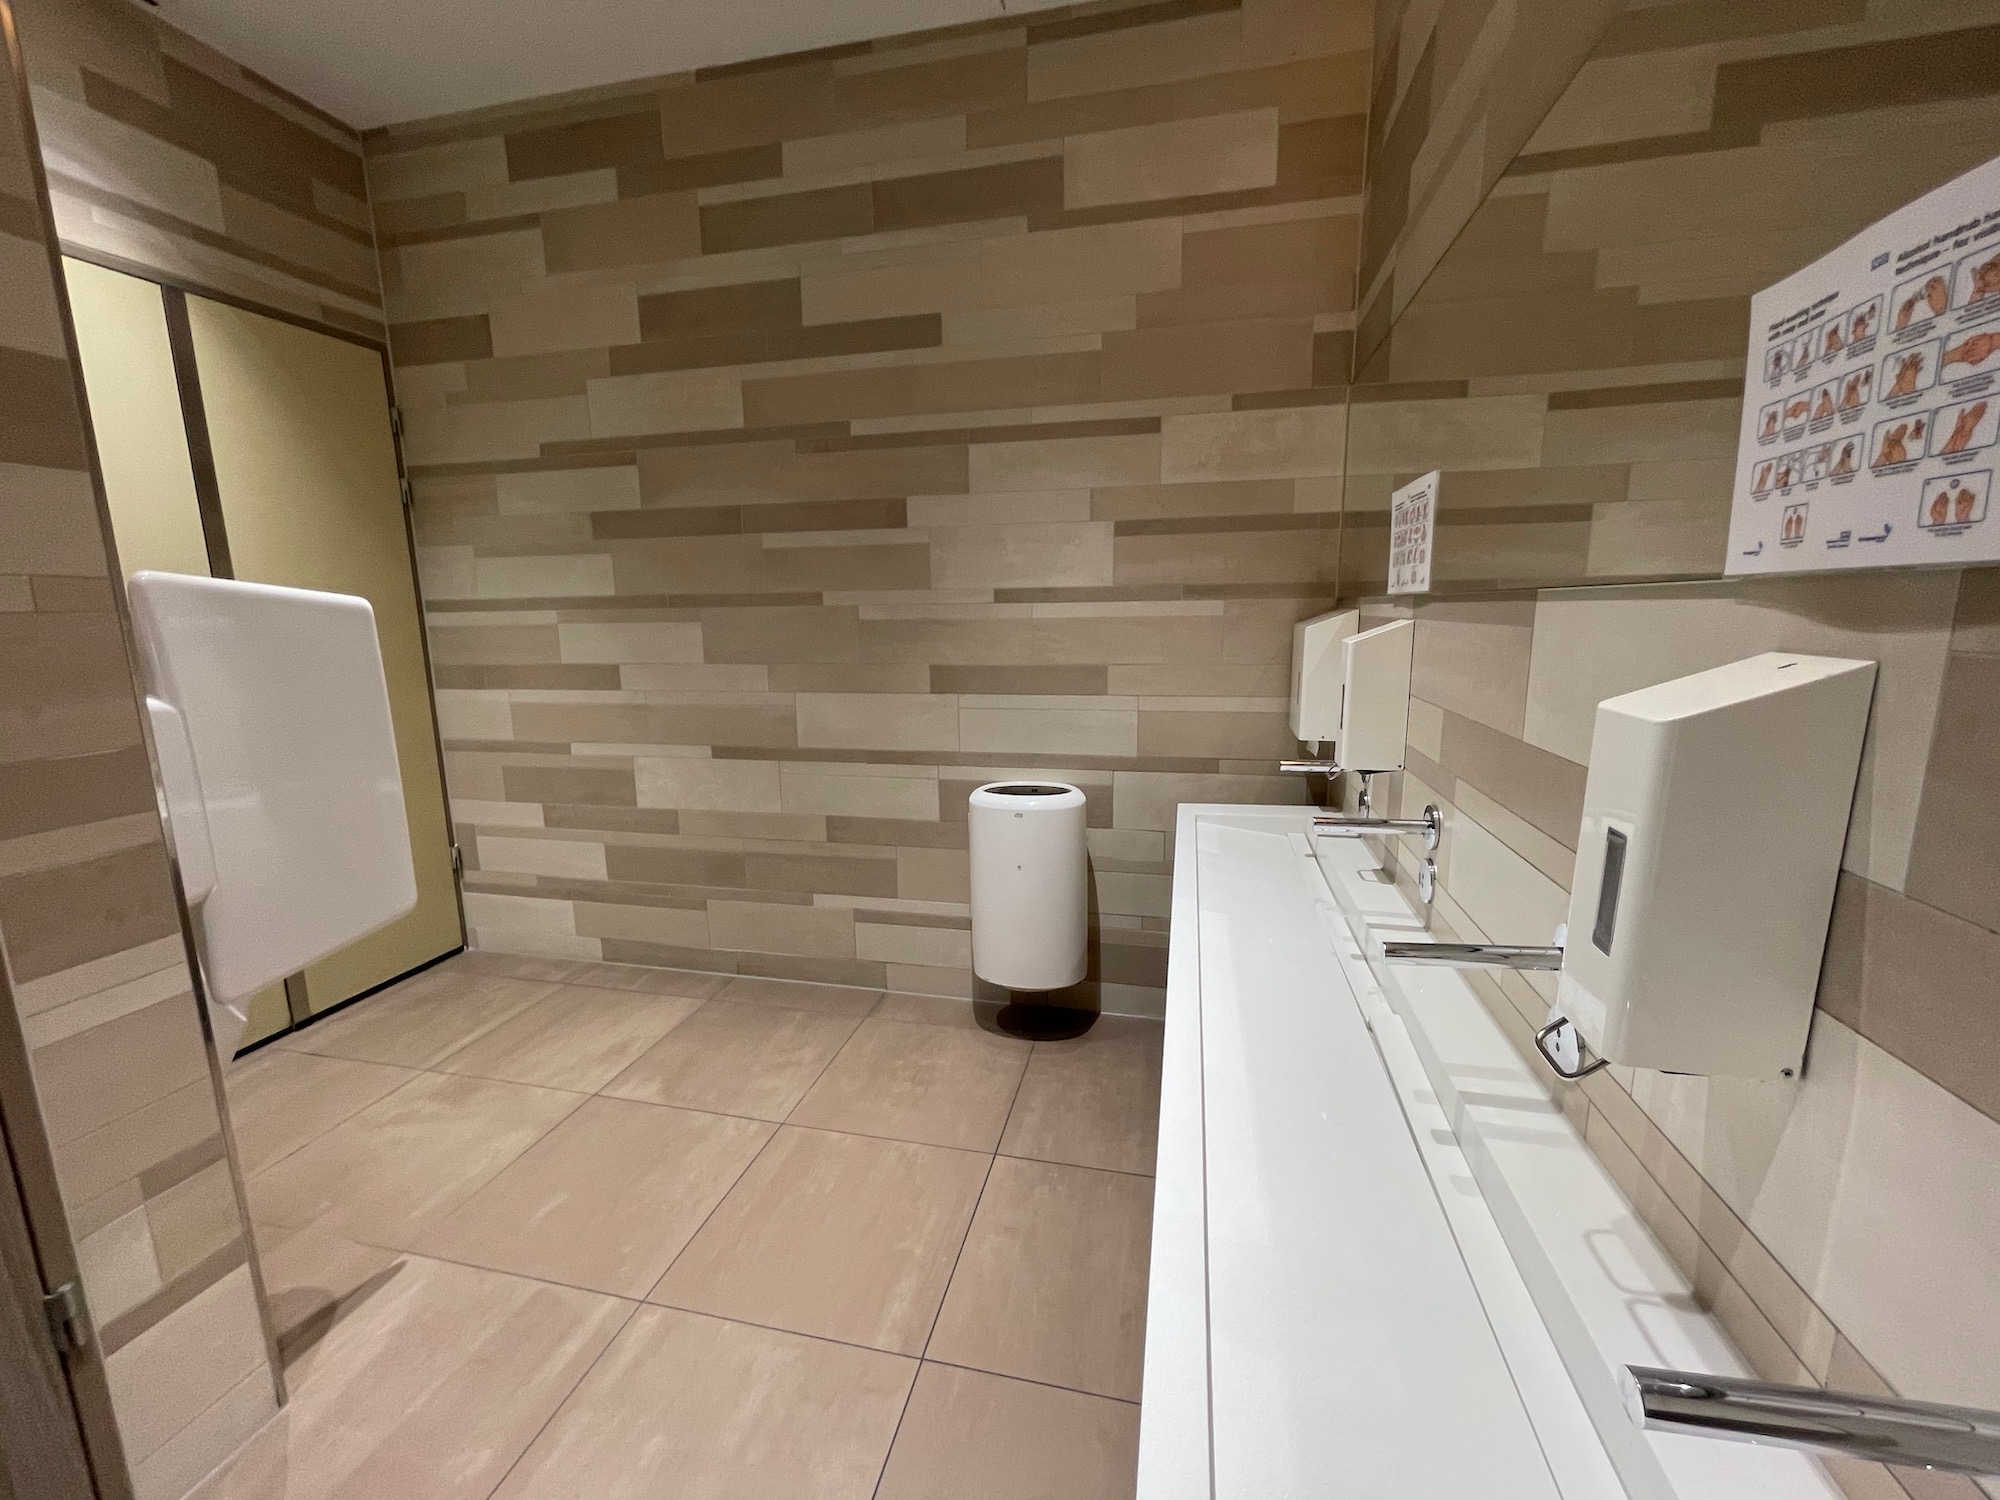 a bathroom with a urinal and urinals